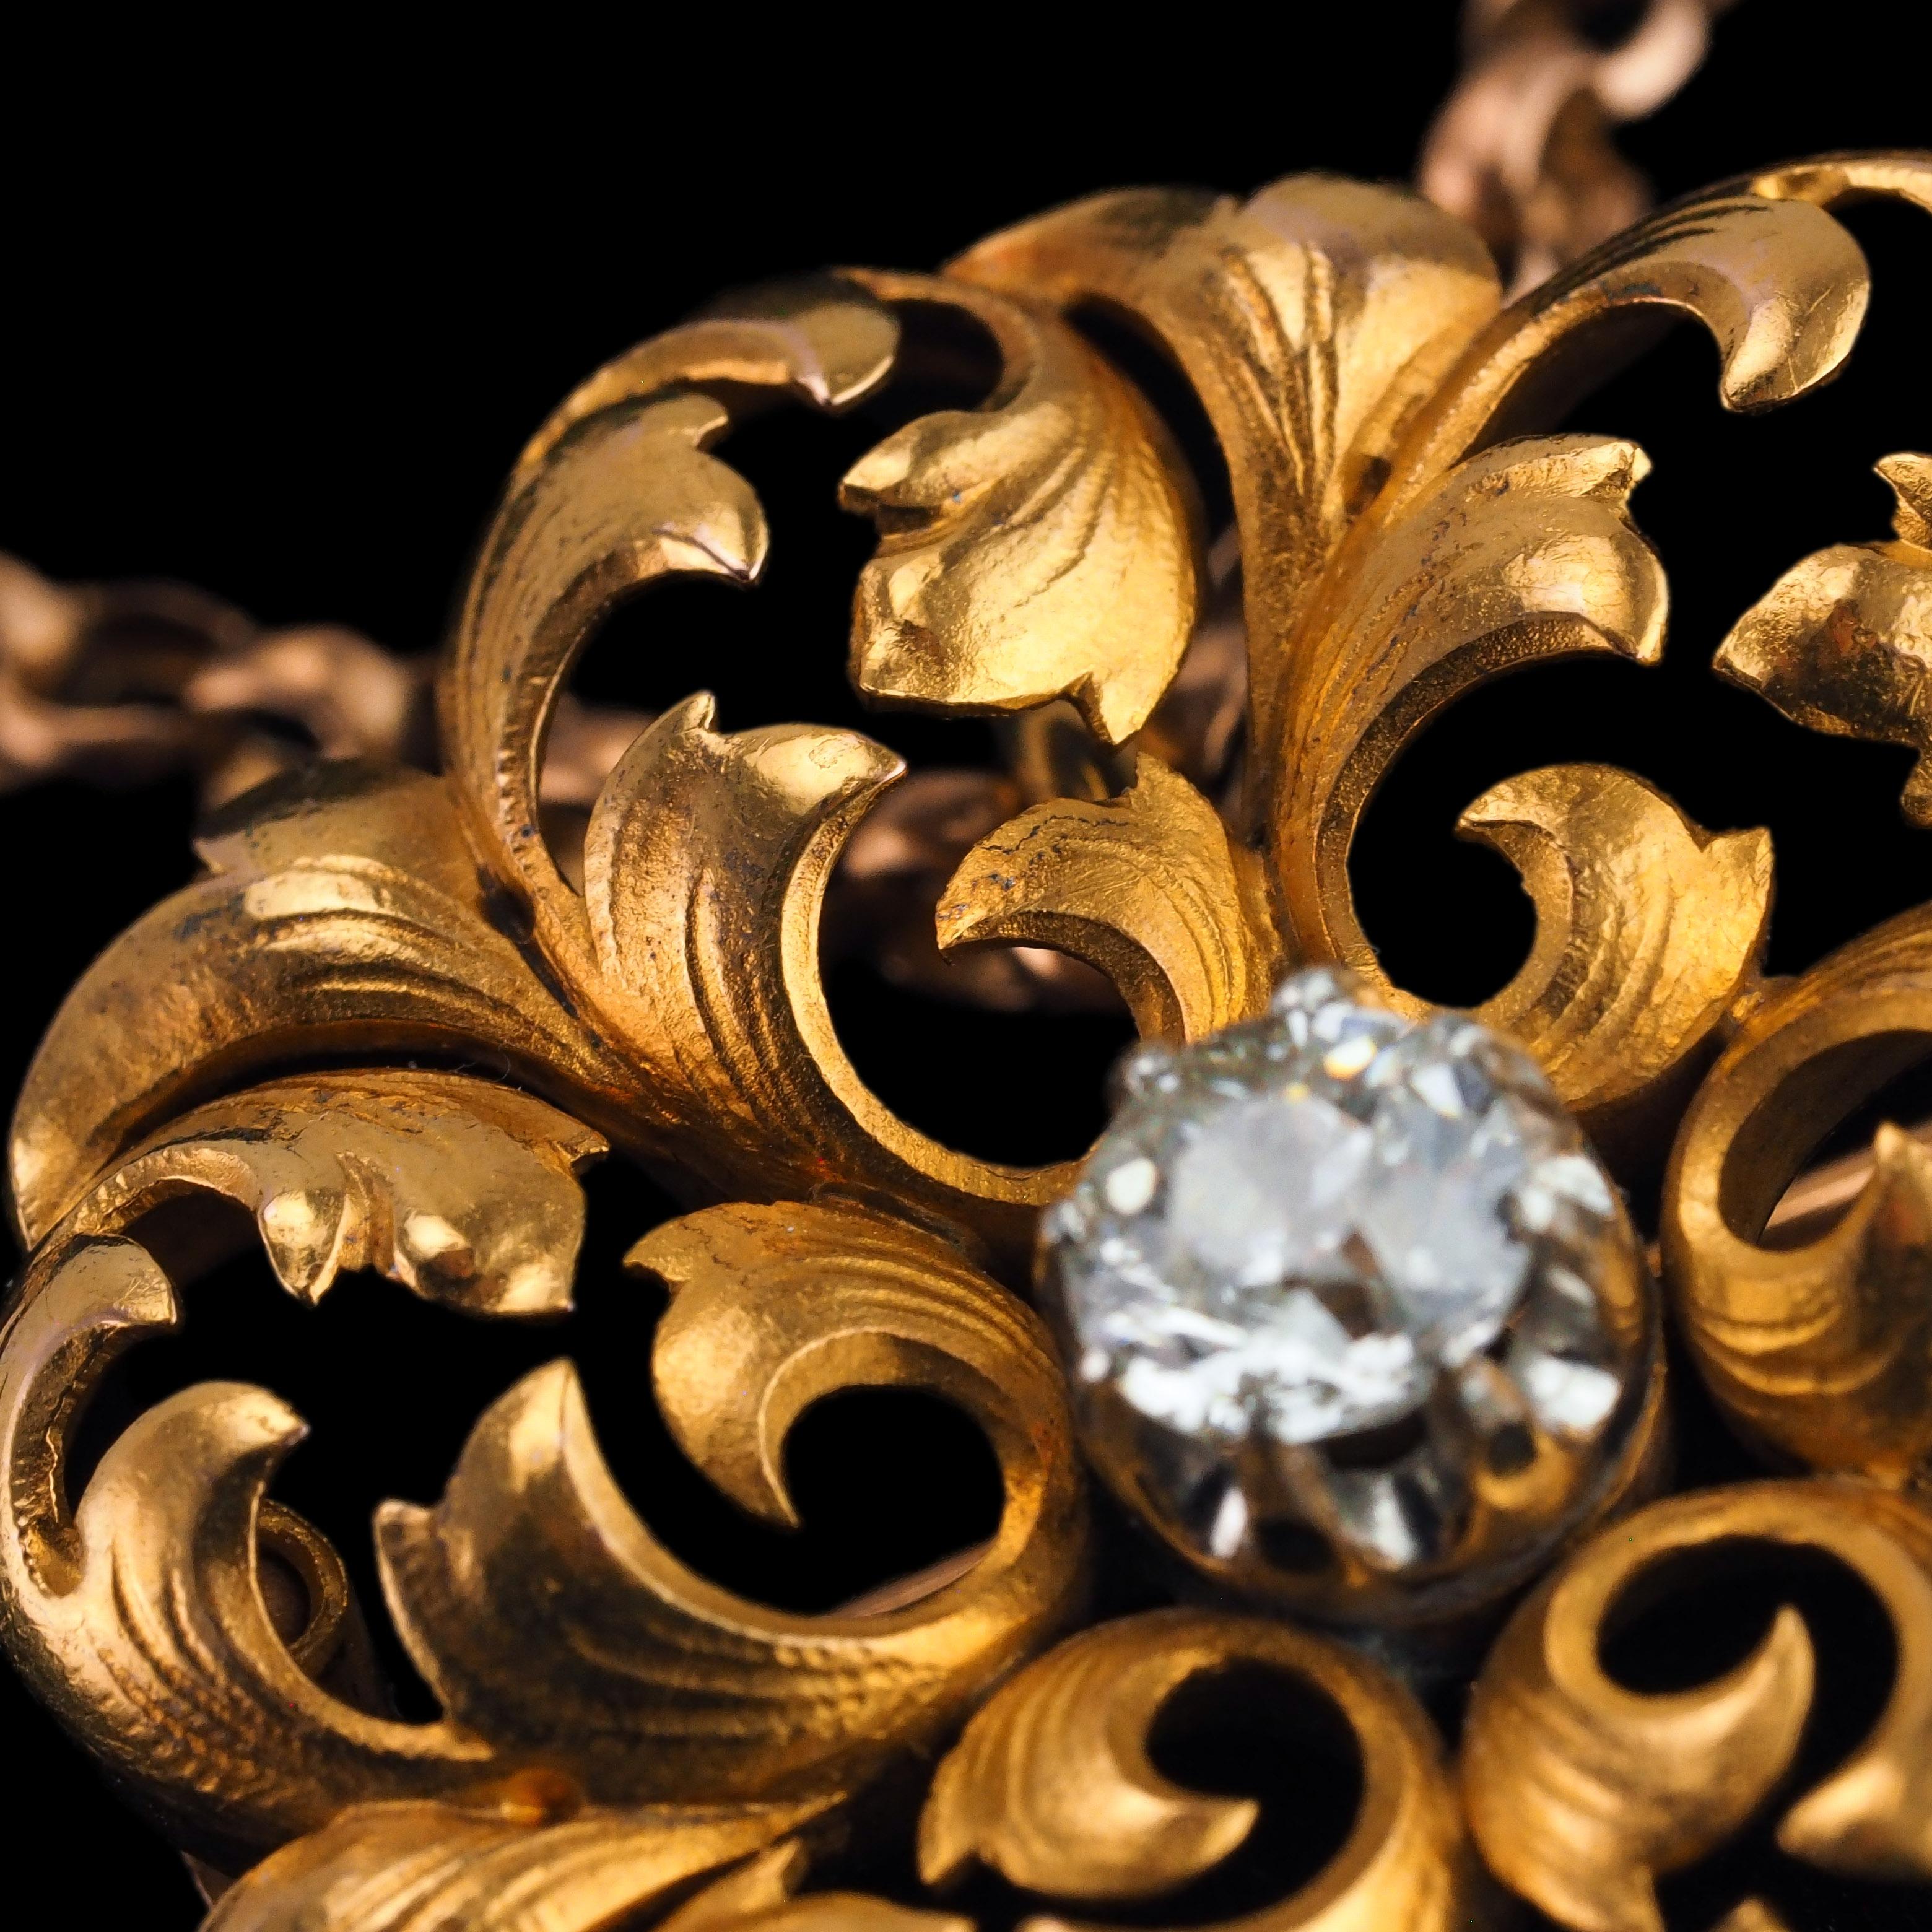 Antique French Diamond Necklace 18K Gold Pendant Brooch 19th C. Flower Acanthus For Sale 12